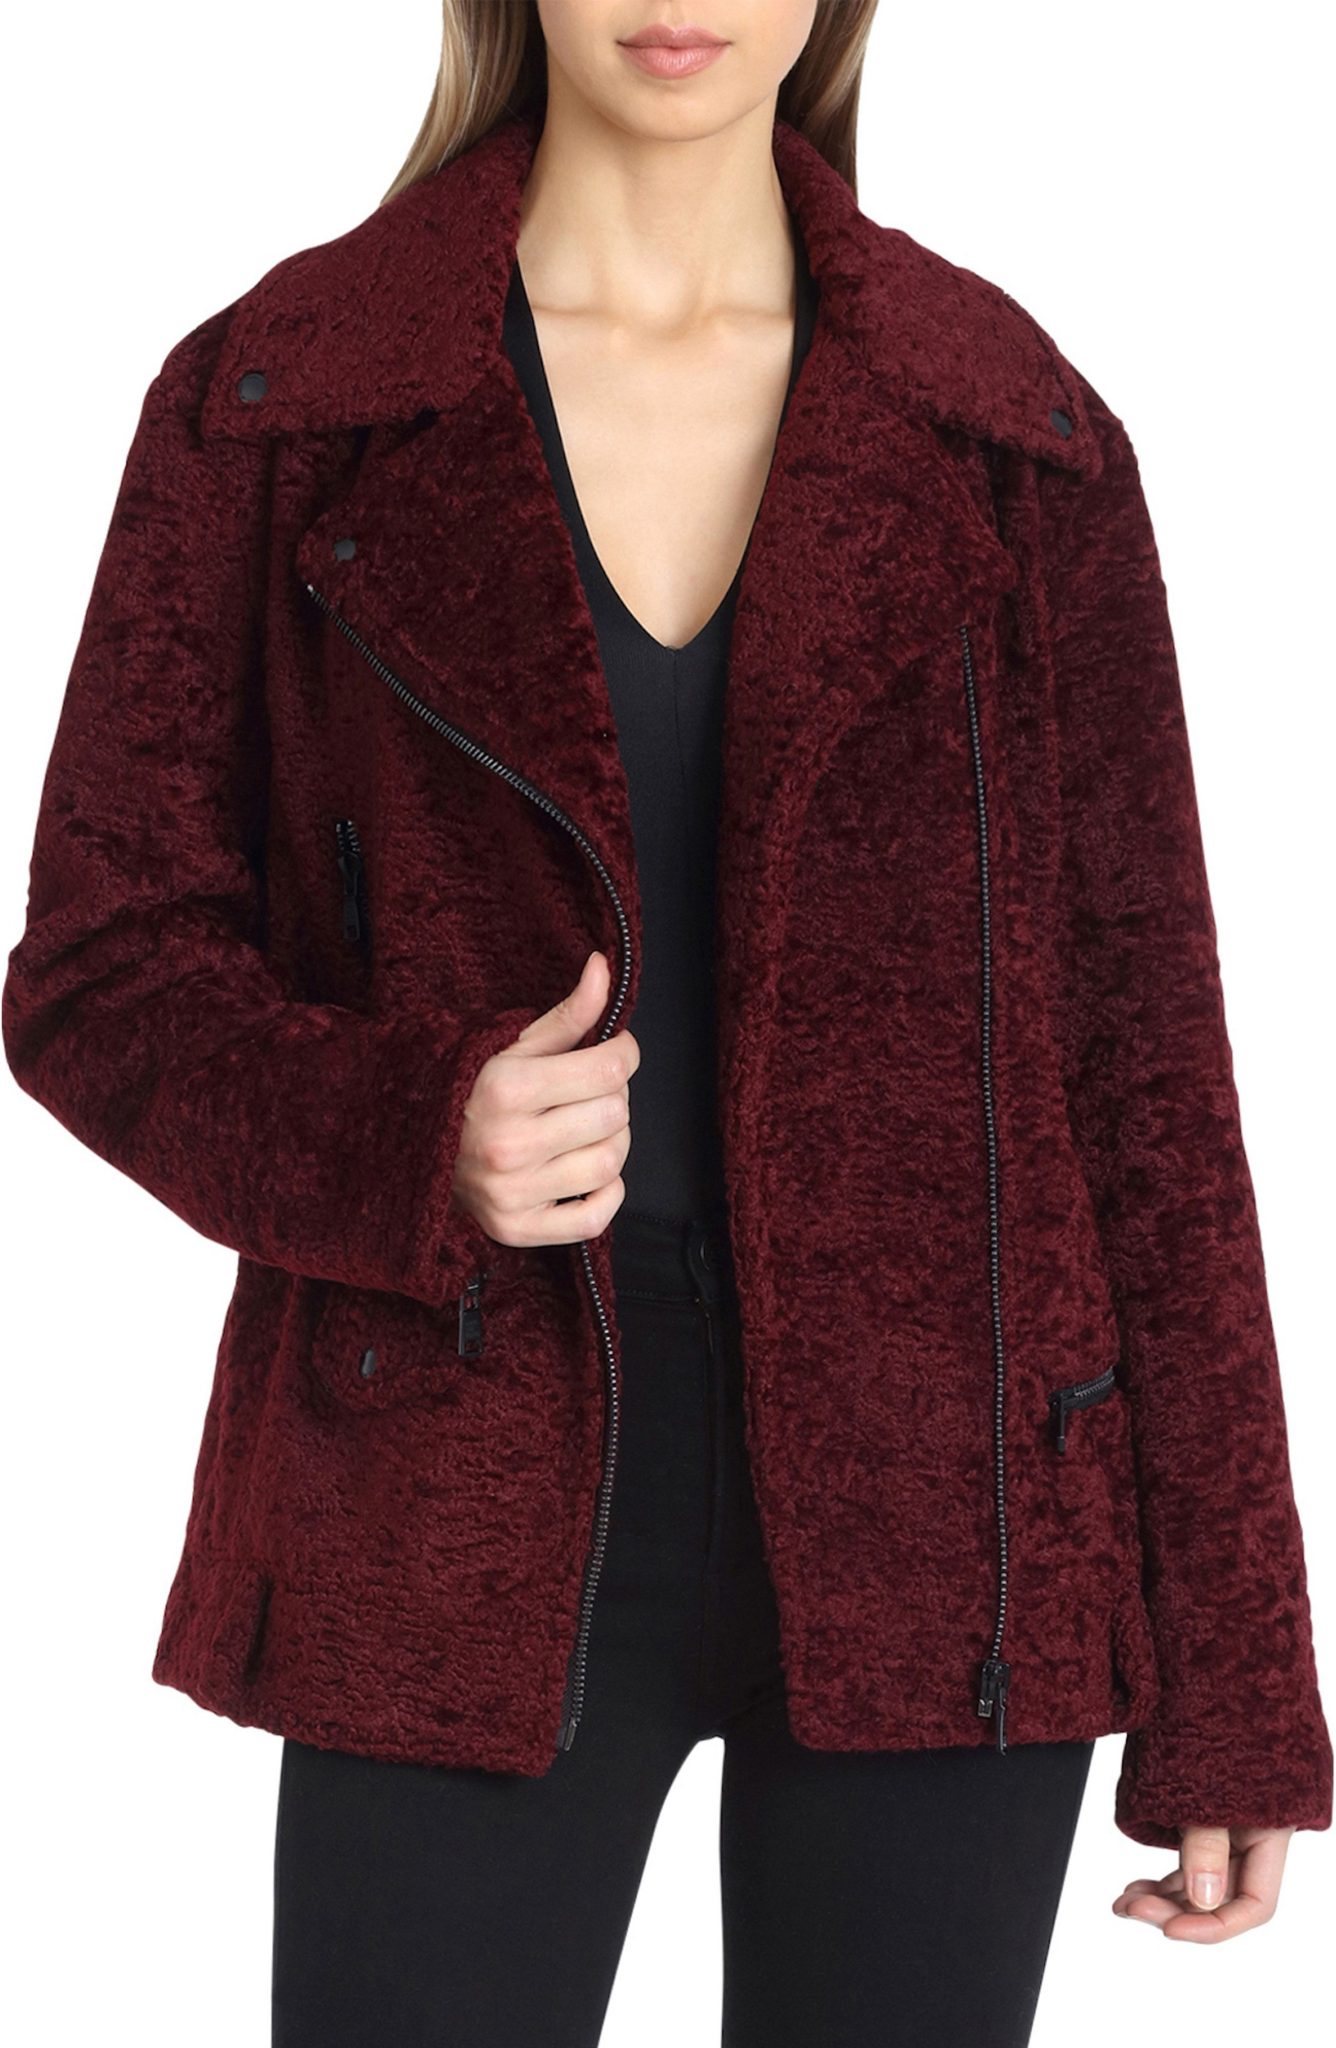 22 faux fur coats you’ll want to bundle up in